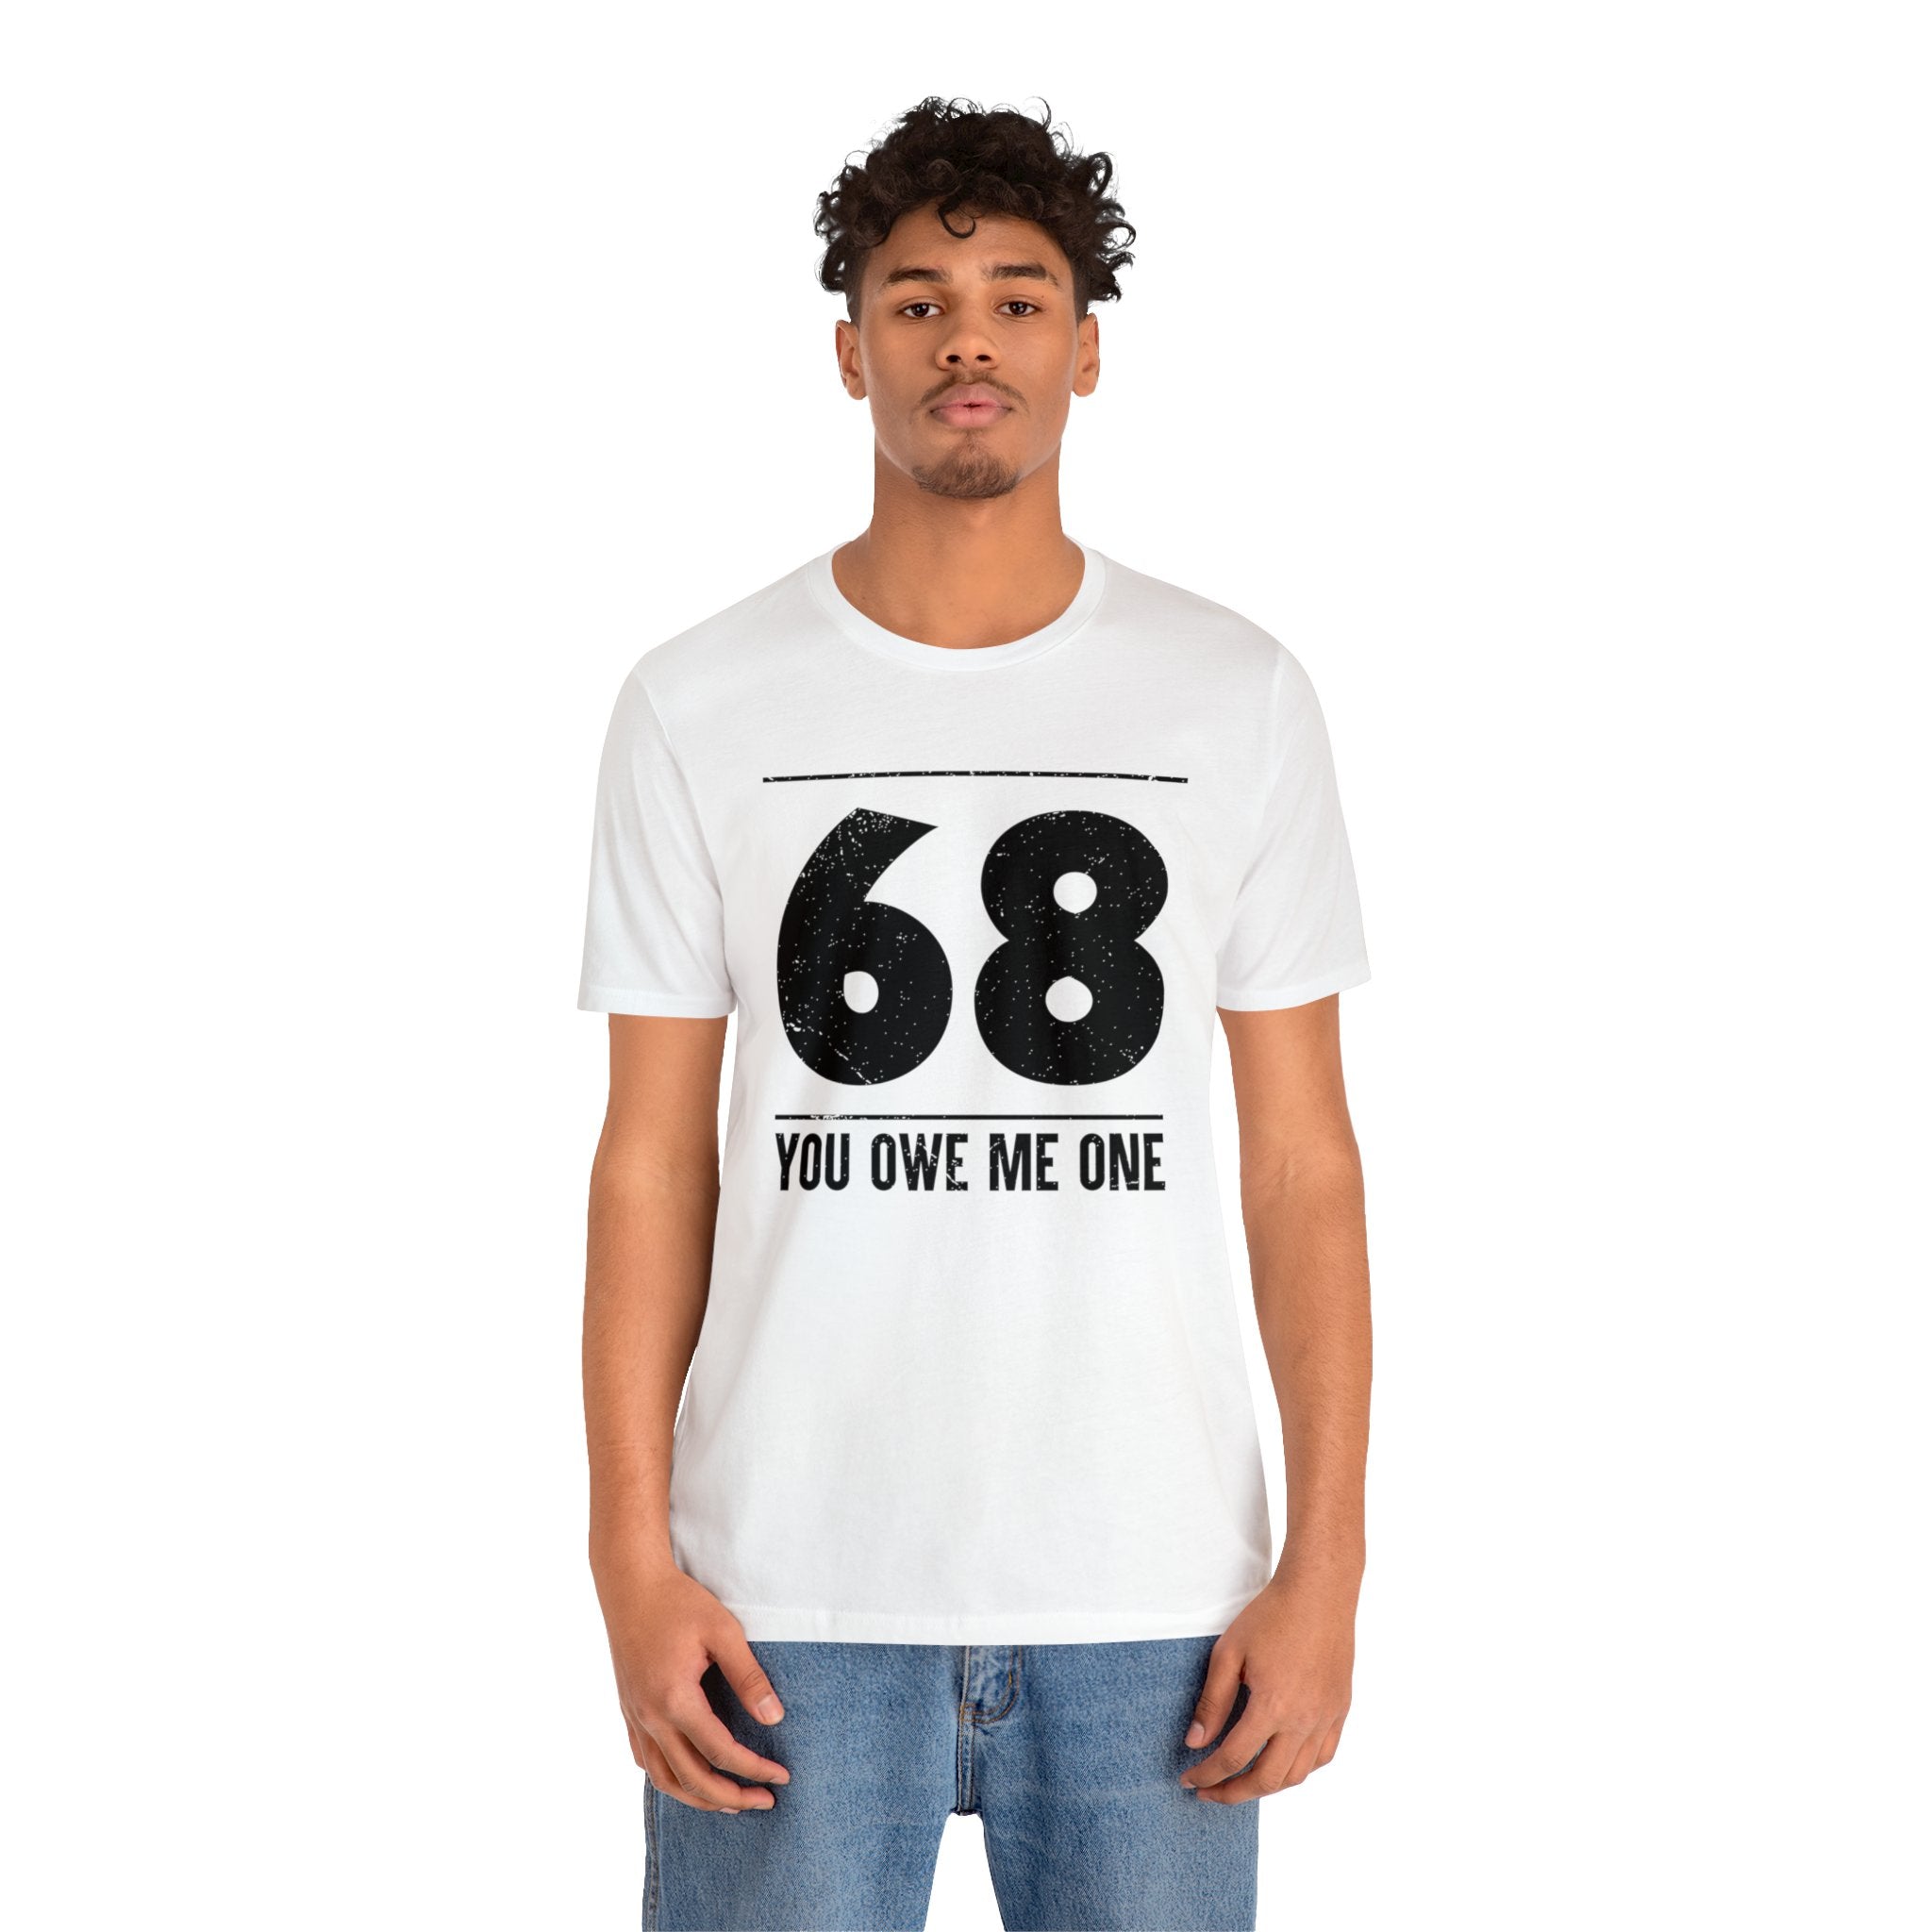 A man wearing a geeky white t-shirt that says 68 You Owe Me One.